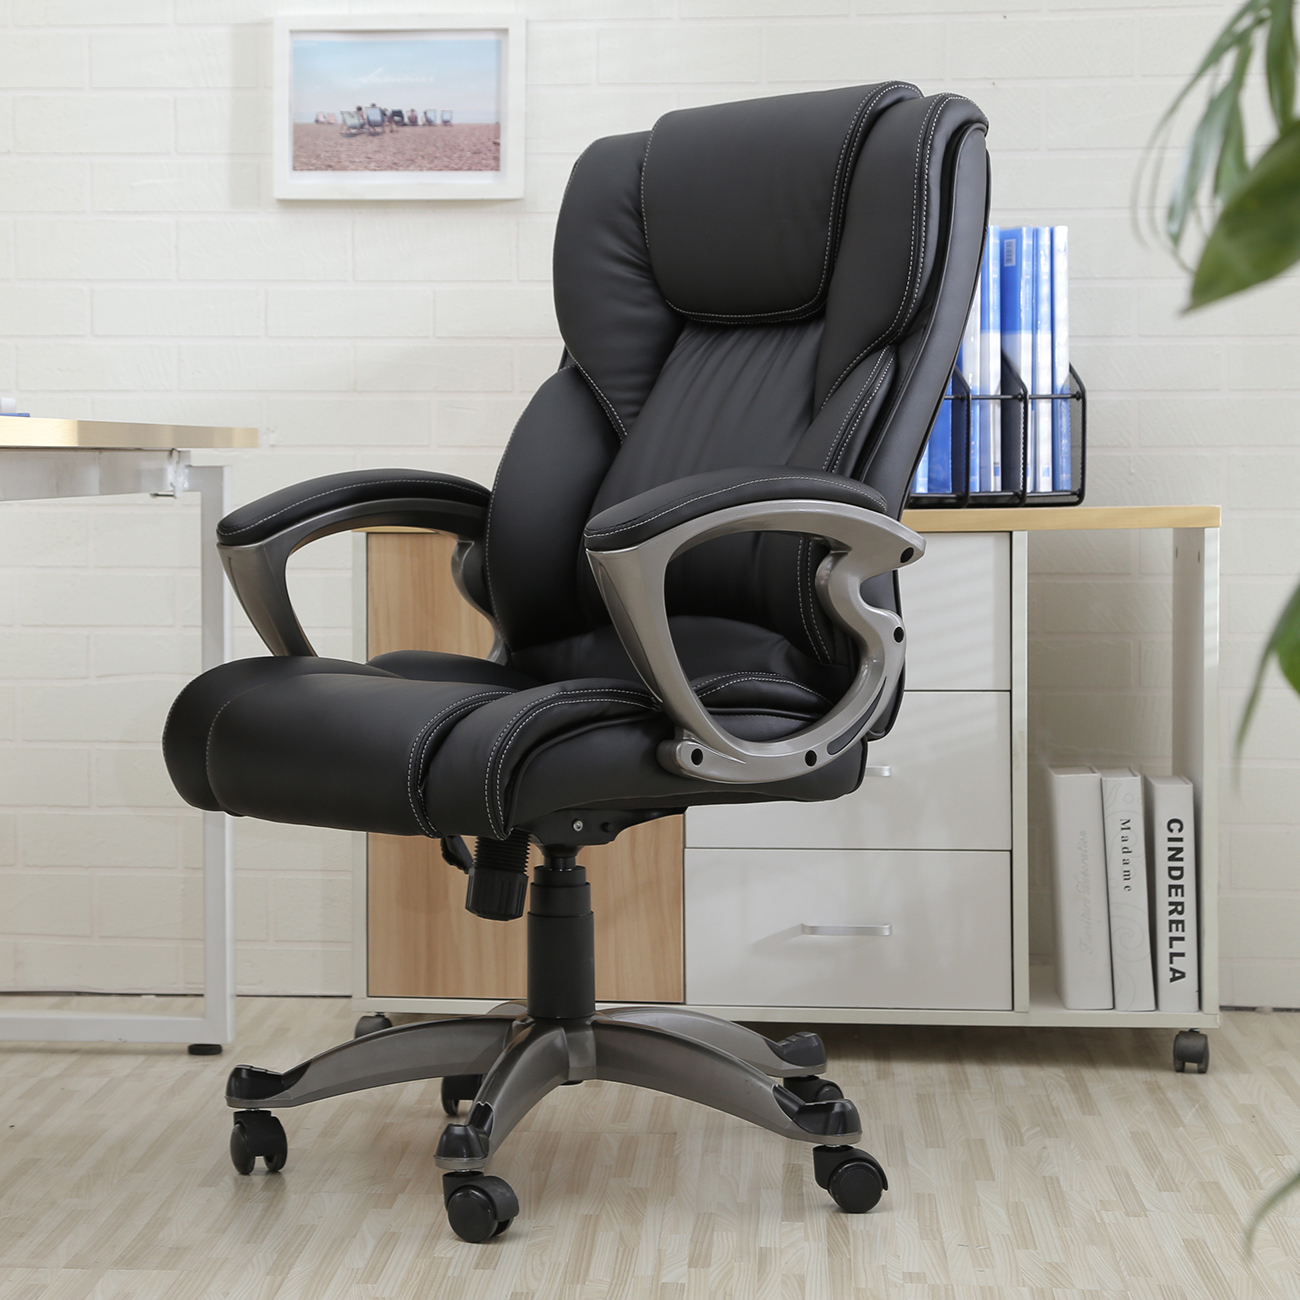 Leather Executive Office Chair High Back: Functionality and Comfort at Its Finest